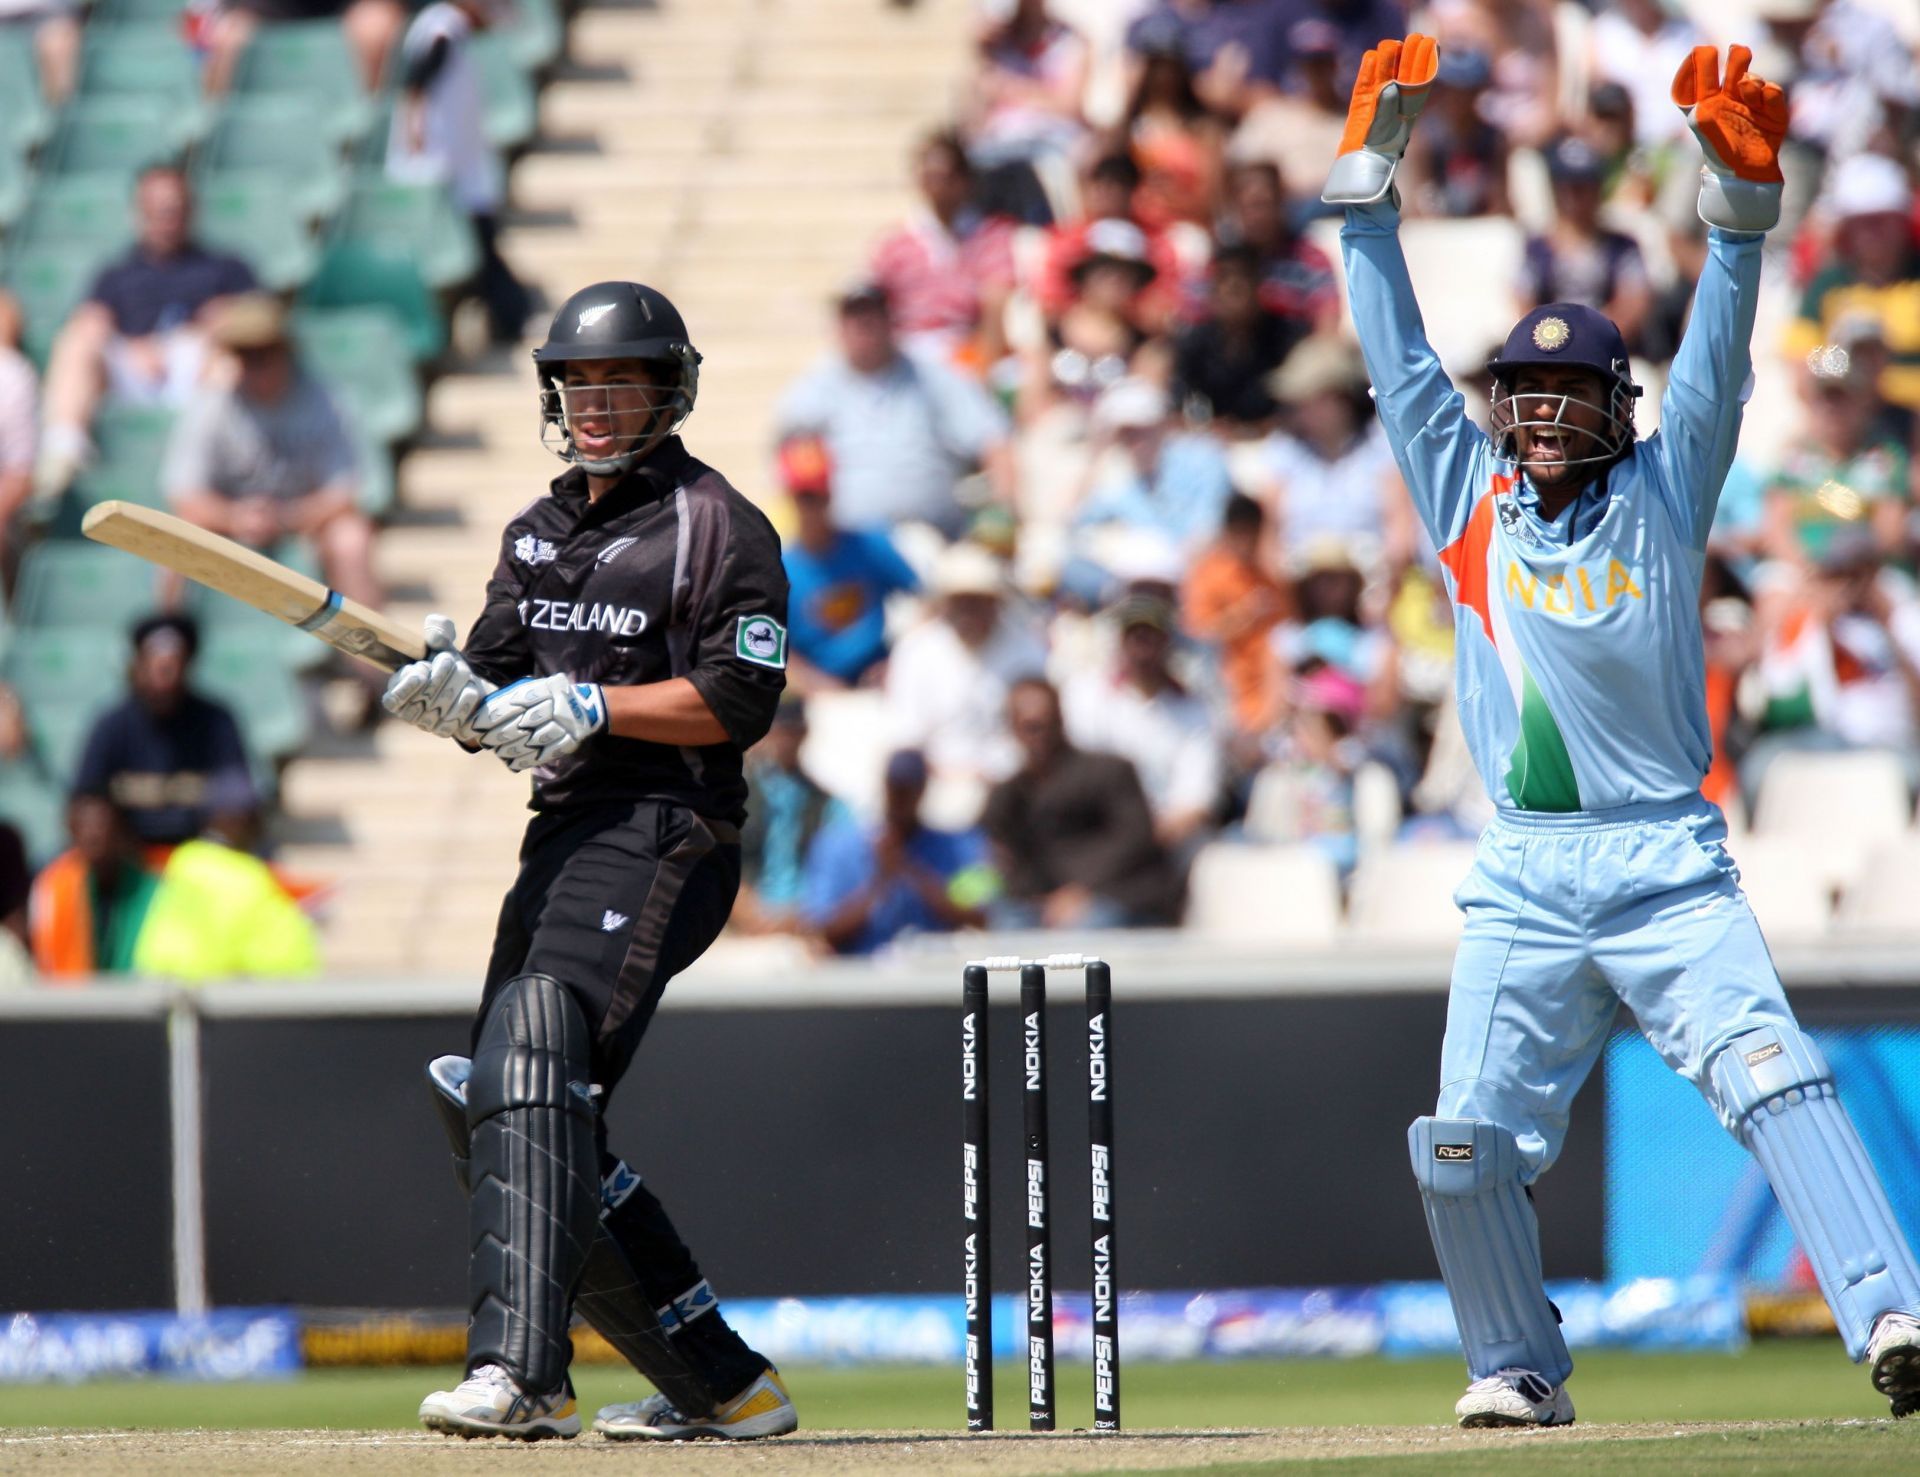 New Zealand have never lost to India in an ICC T20 World Cup match